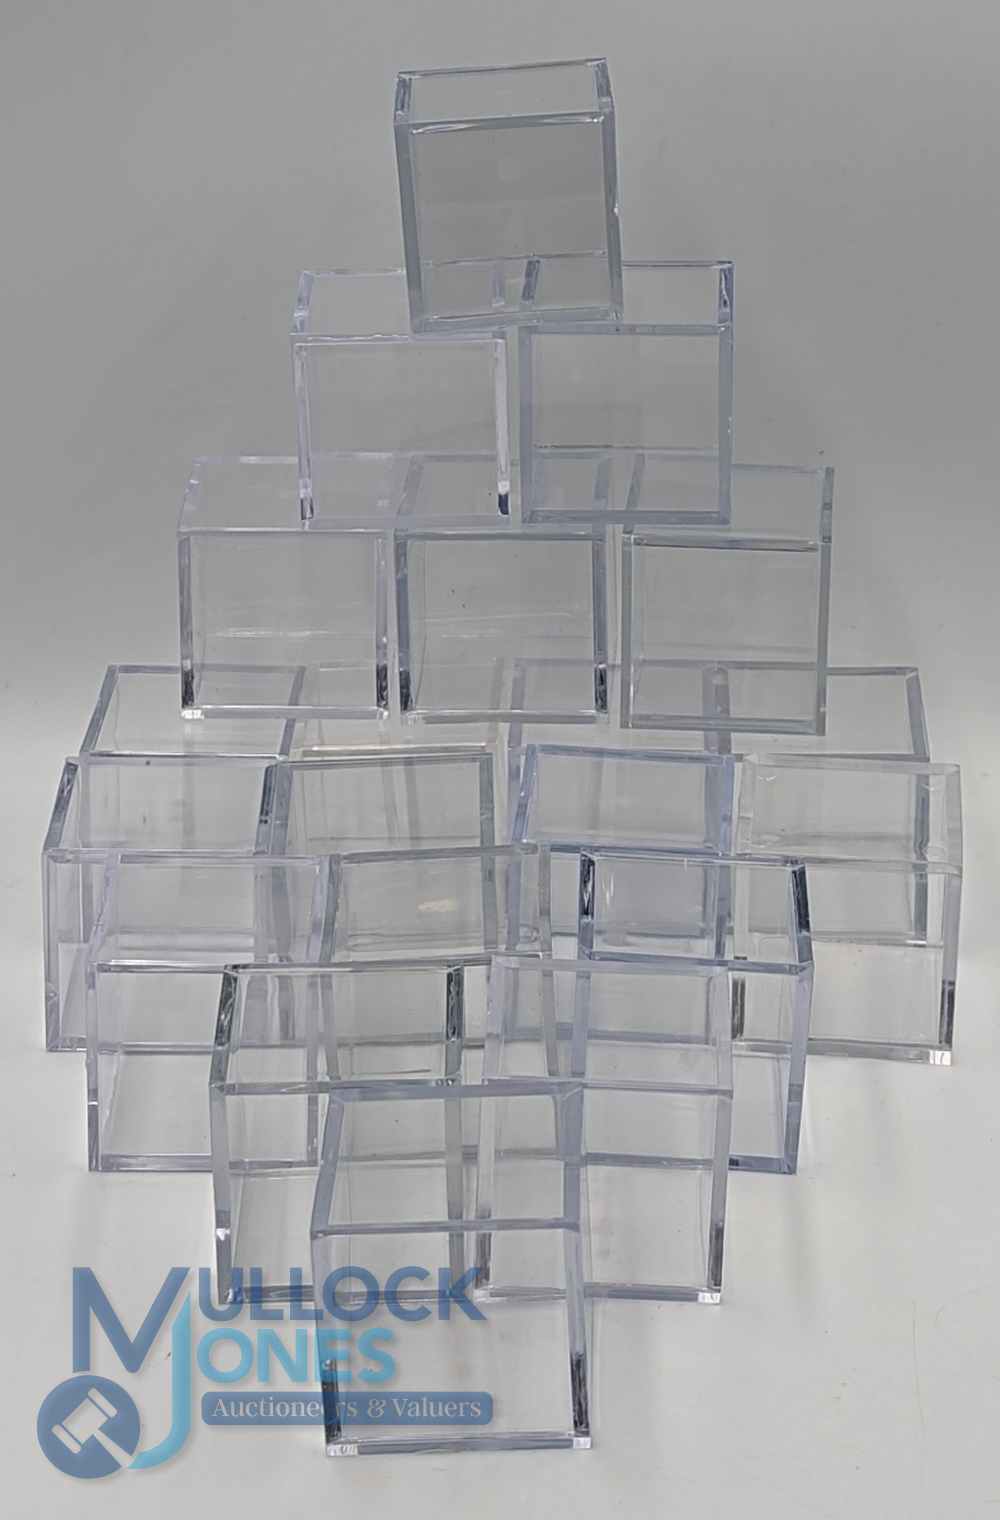 20 Acrylic golf ball display box cubes: 5cm boxes in good used condition